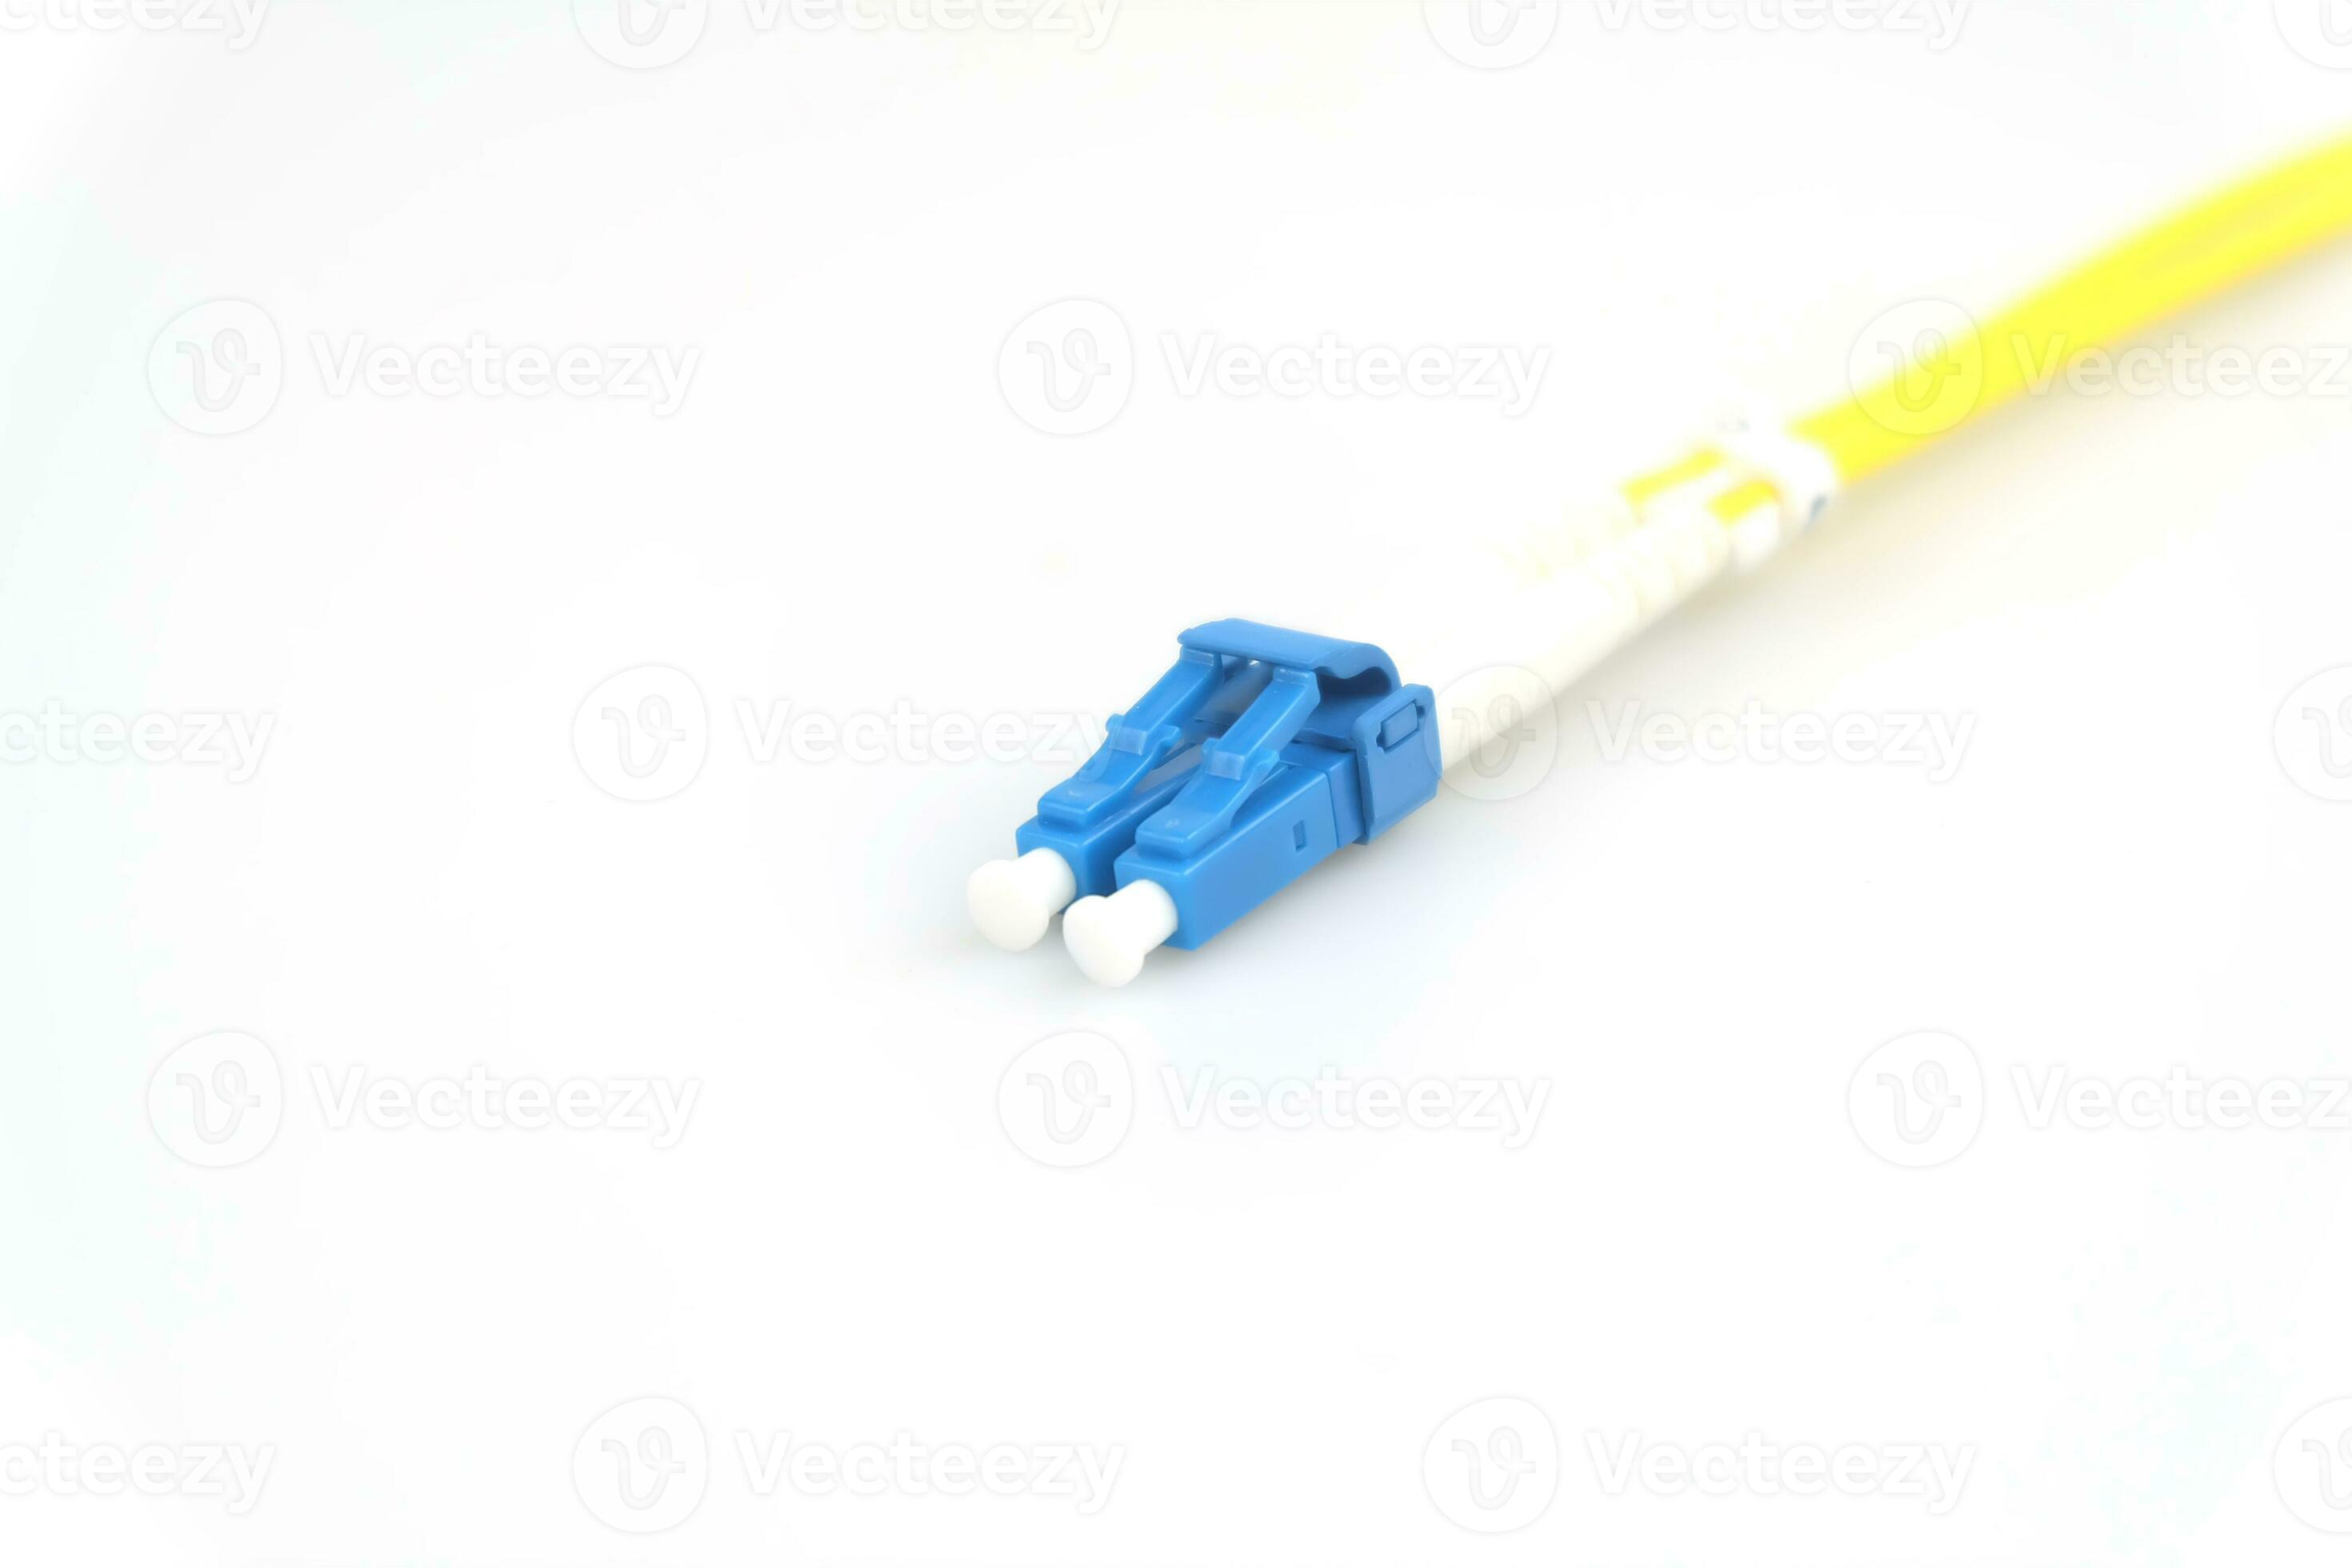 Fiber optic cable connector type lc, isolated on white background 27840453  Stock Photo at Vecteezy